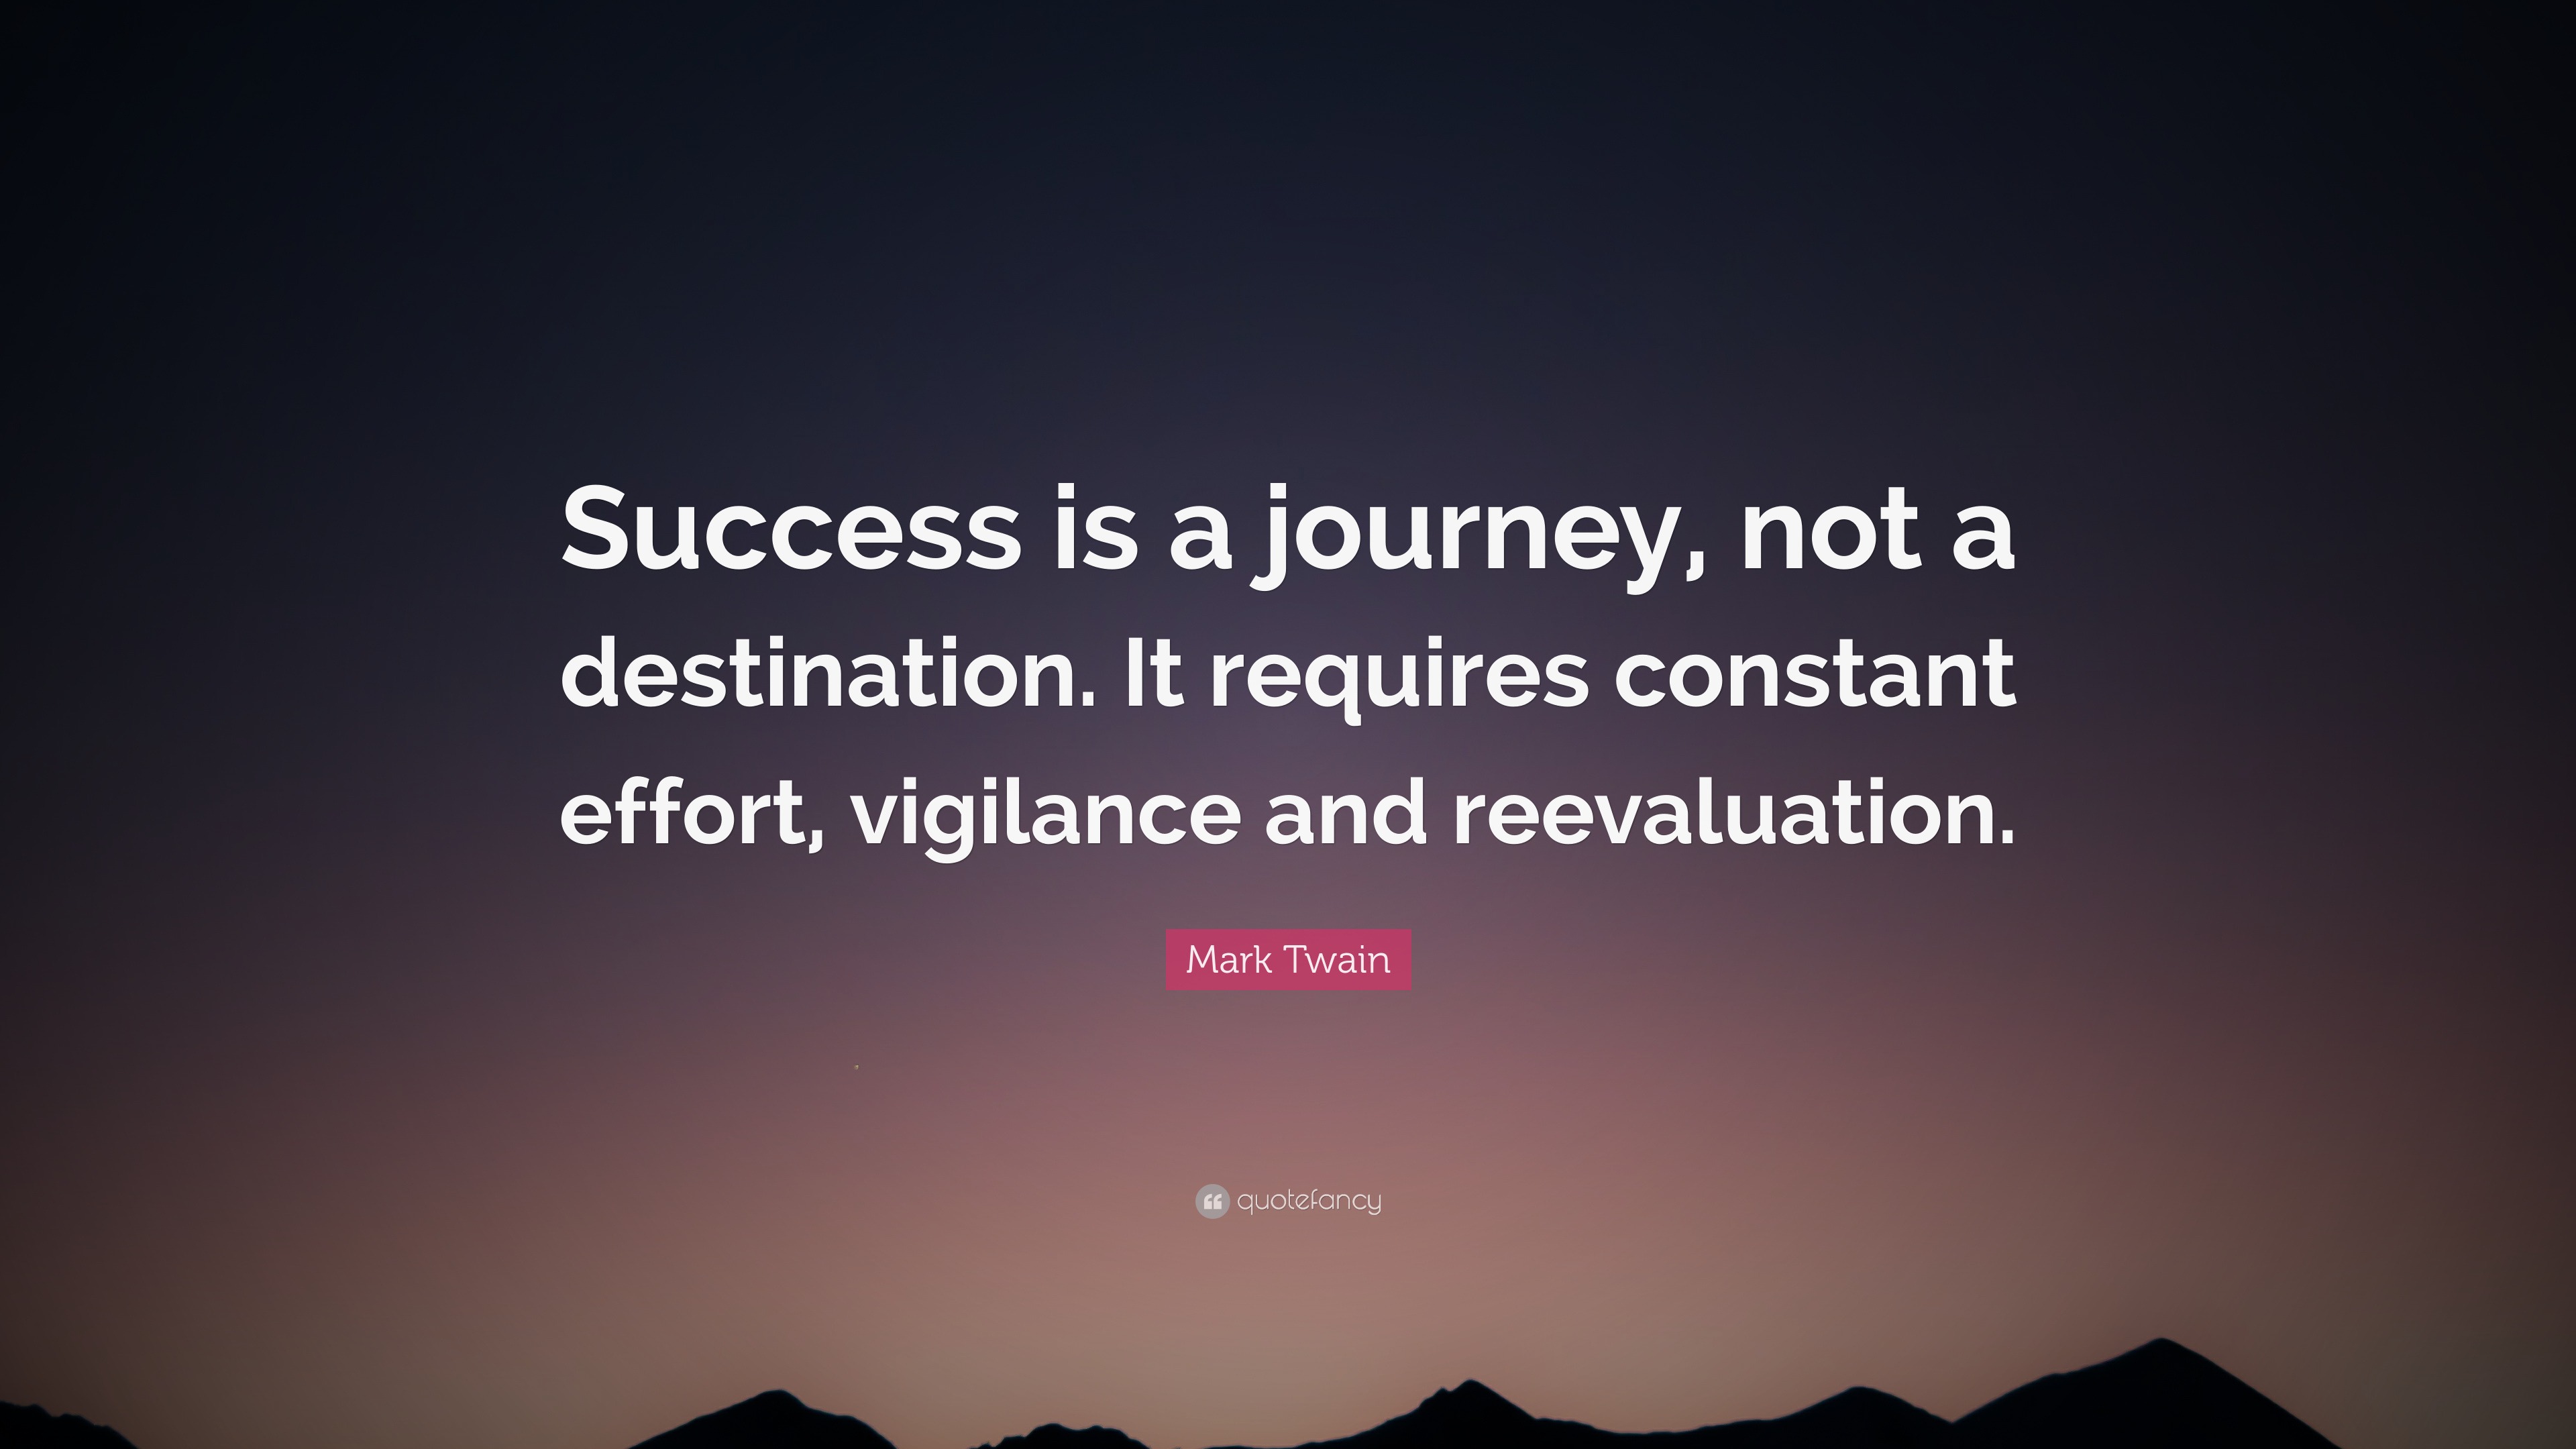 business journey quotes